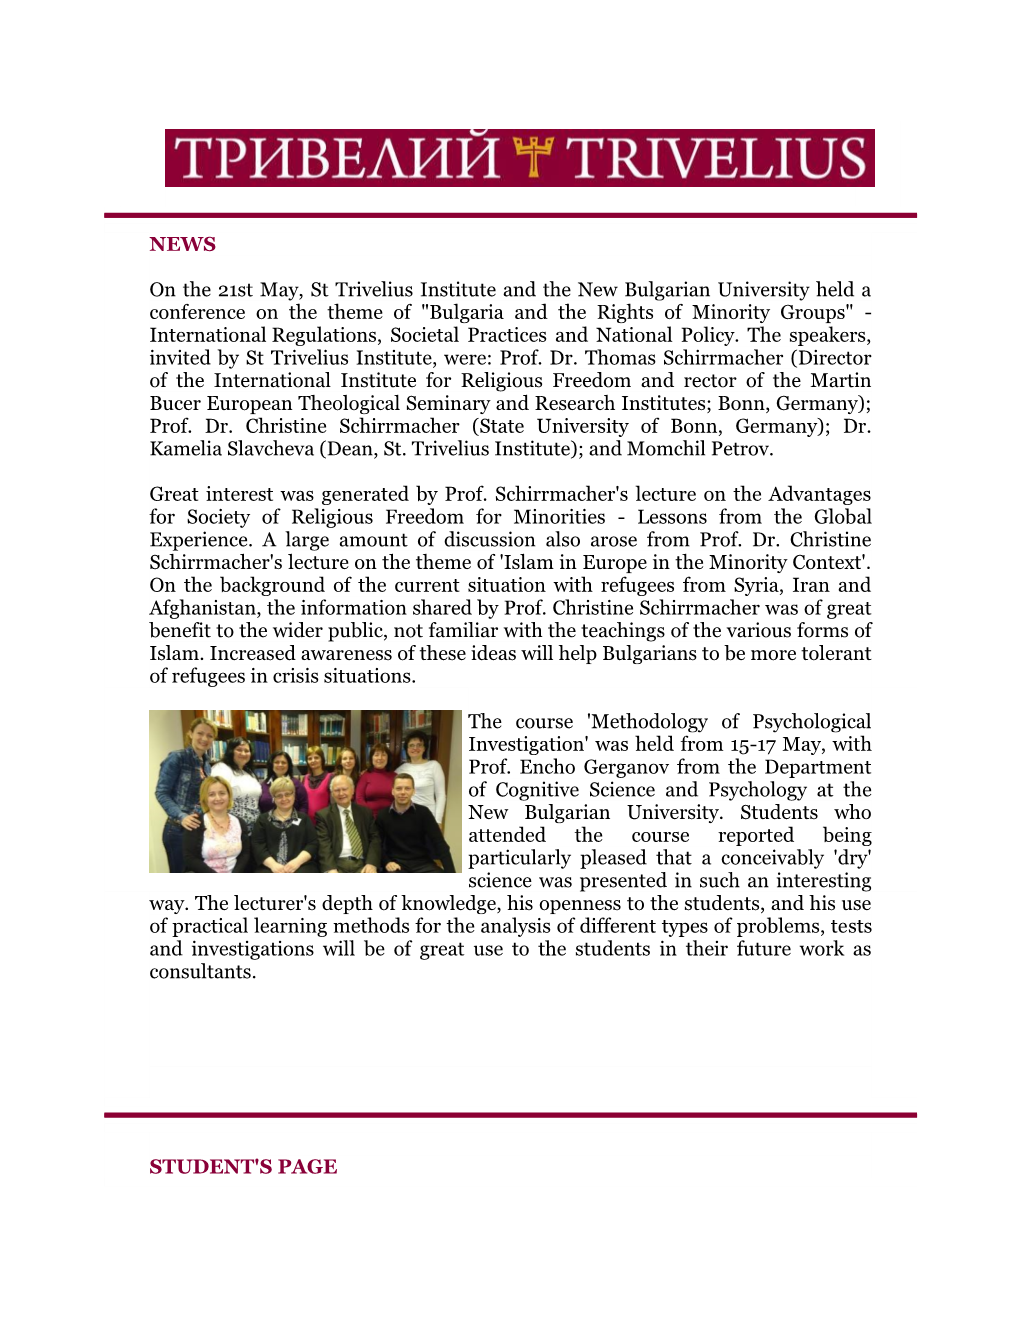 NEWS on the 21St May, St Trivelius Institute and the New Bulgarian